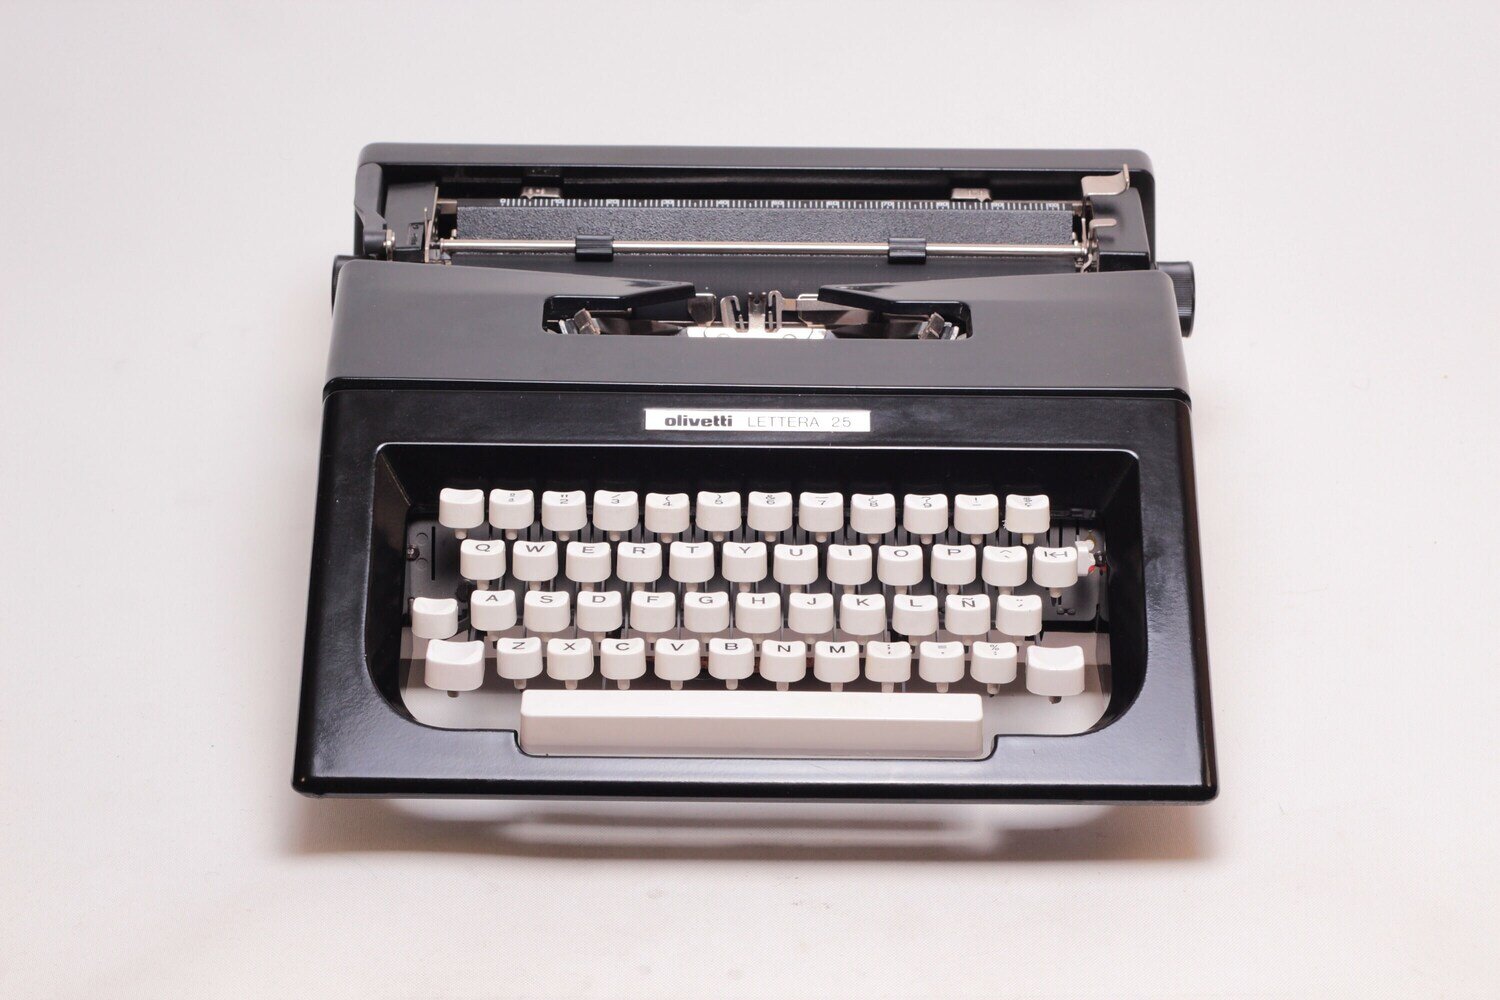 Lettera 25 Black Typewriter, Vintage, Manual Portable, Professionally Serviced by Typewriter.Company